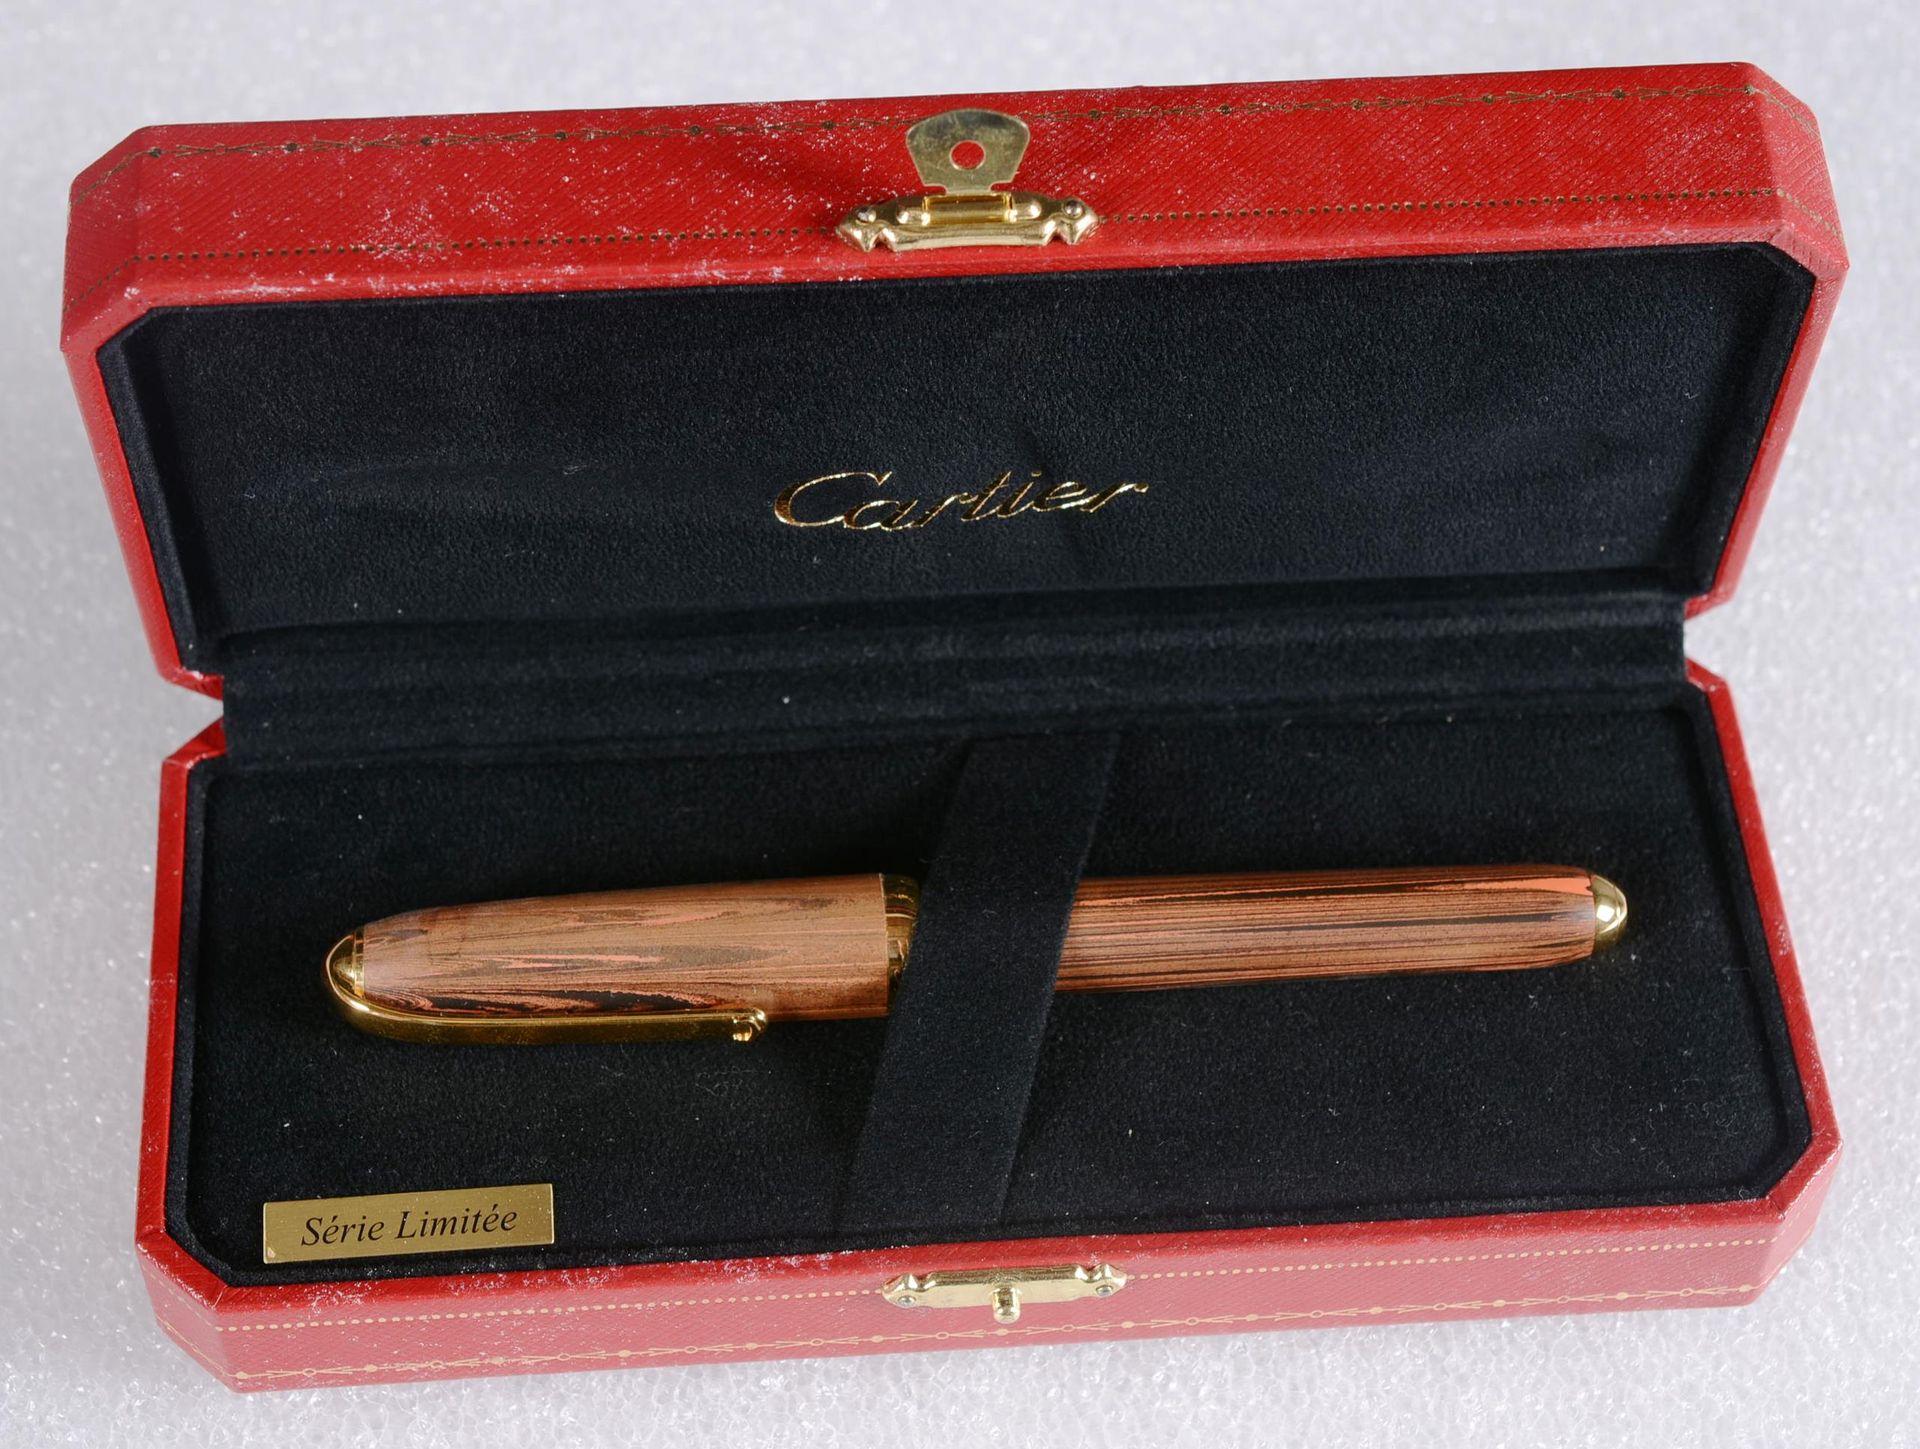 CARTIER, Stylo plume CARTIER

Fountain pen from the Louis Cartier collection in &hellip;